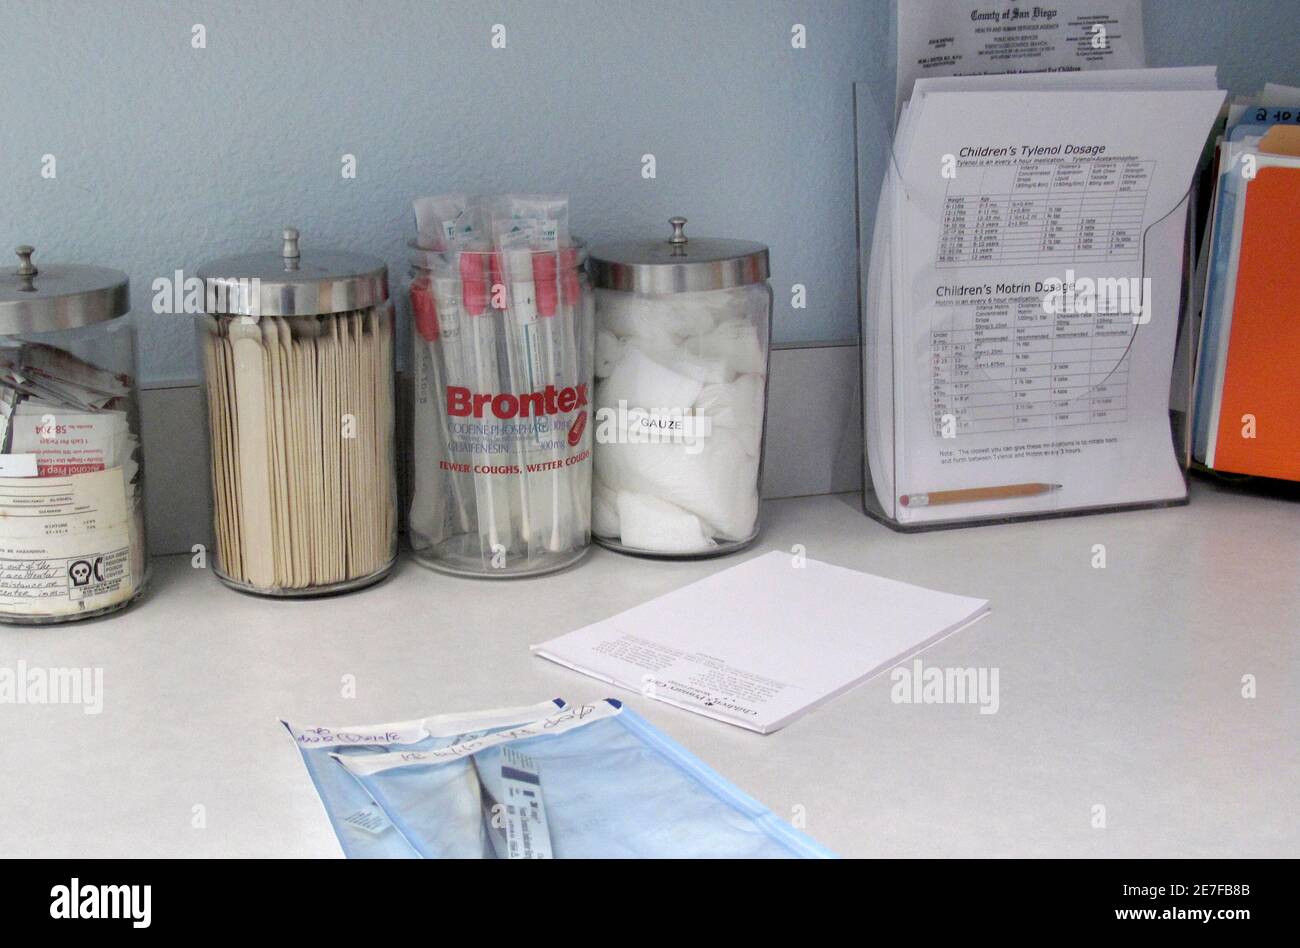 Medical supplies in a paediatrician's office is shown in Encinitas, California July 30, 2009 as the United States government debates health care reform.   REUTERS/Mike Blake (UNITED STATES HEALTH) Stock Photo